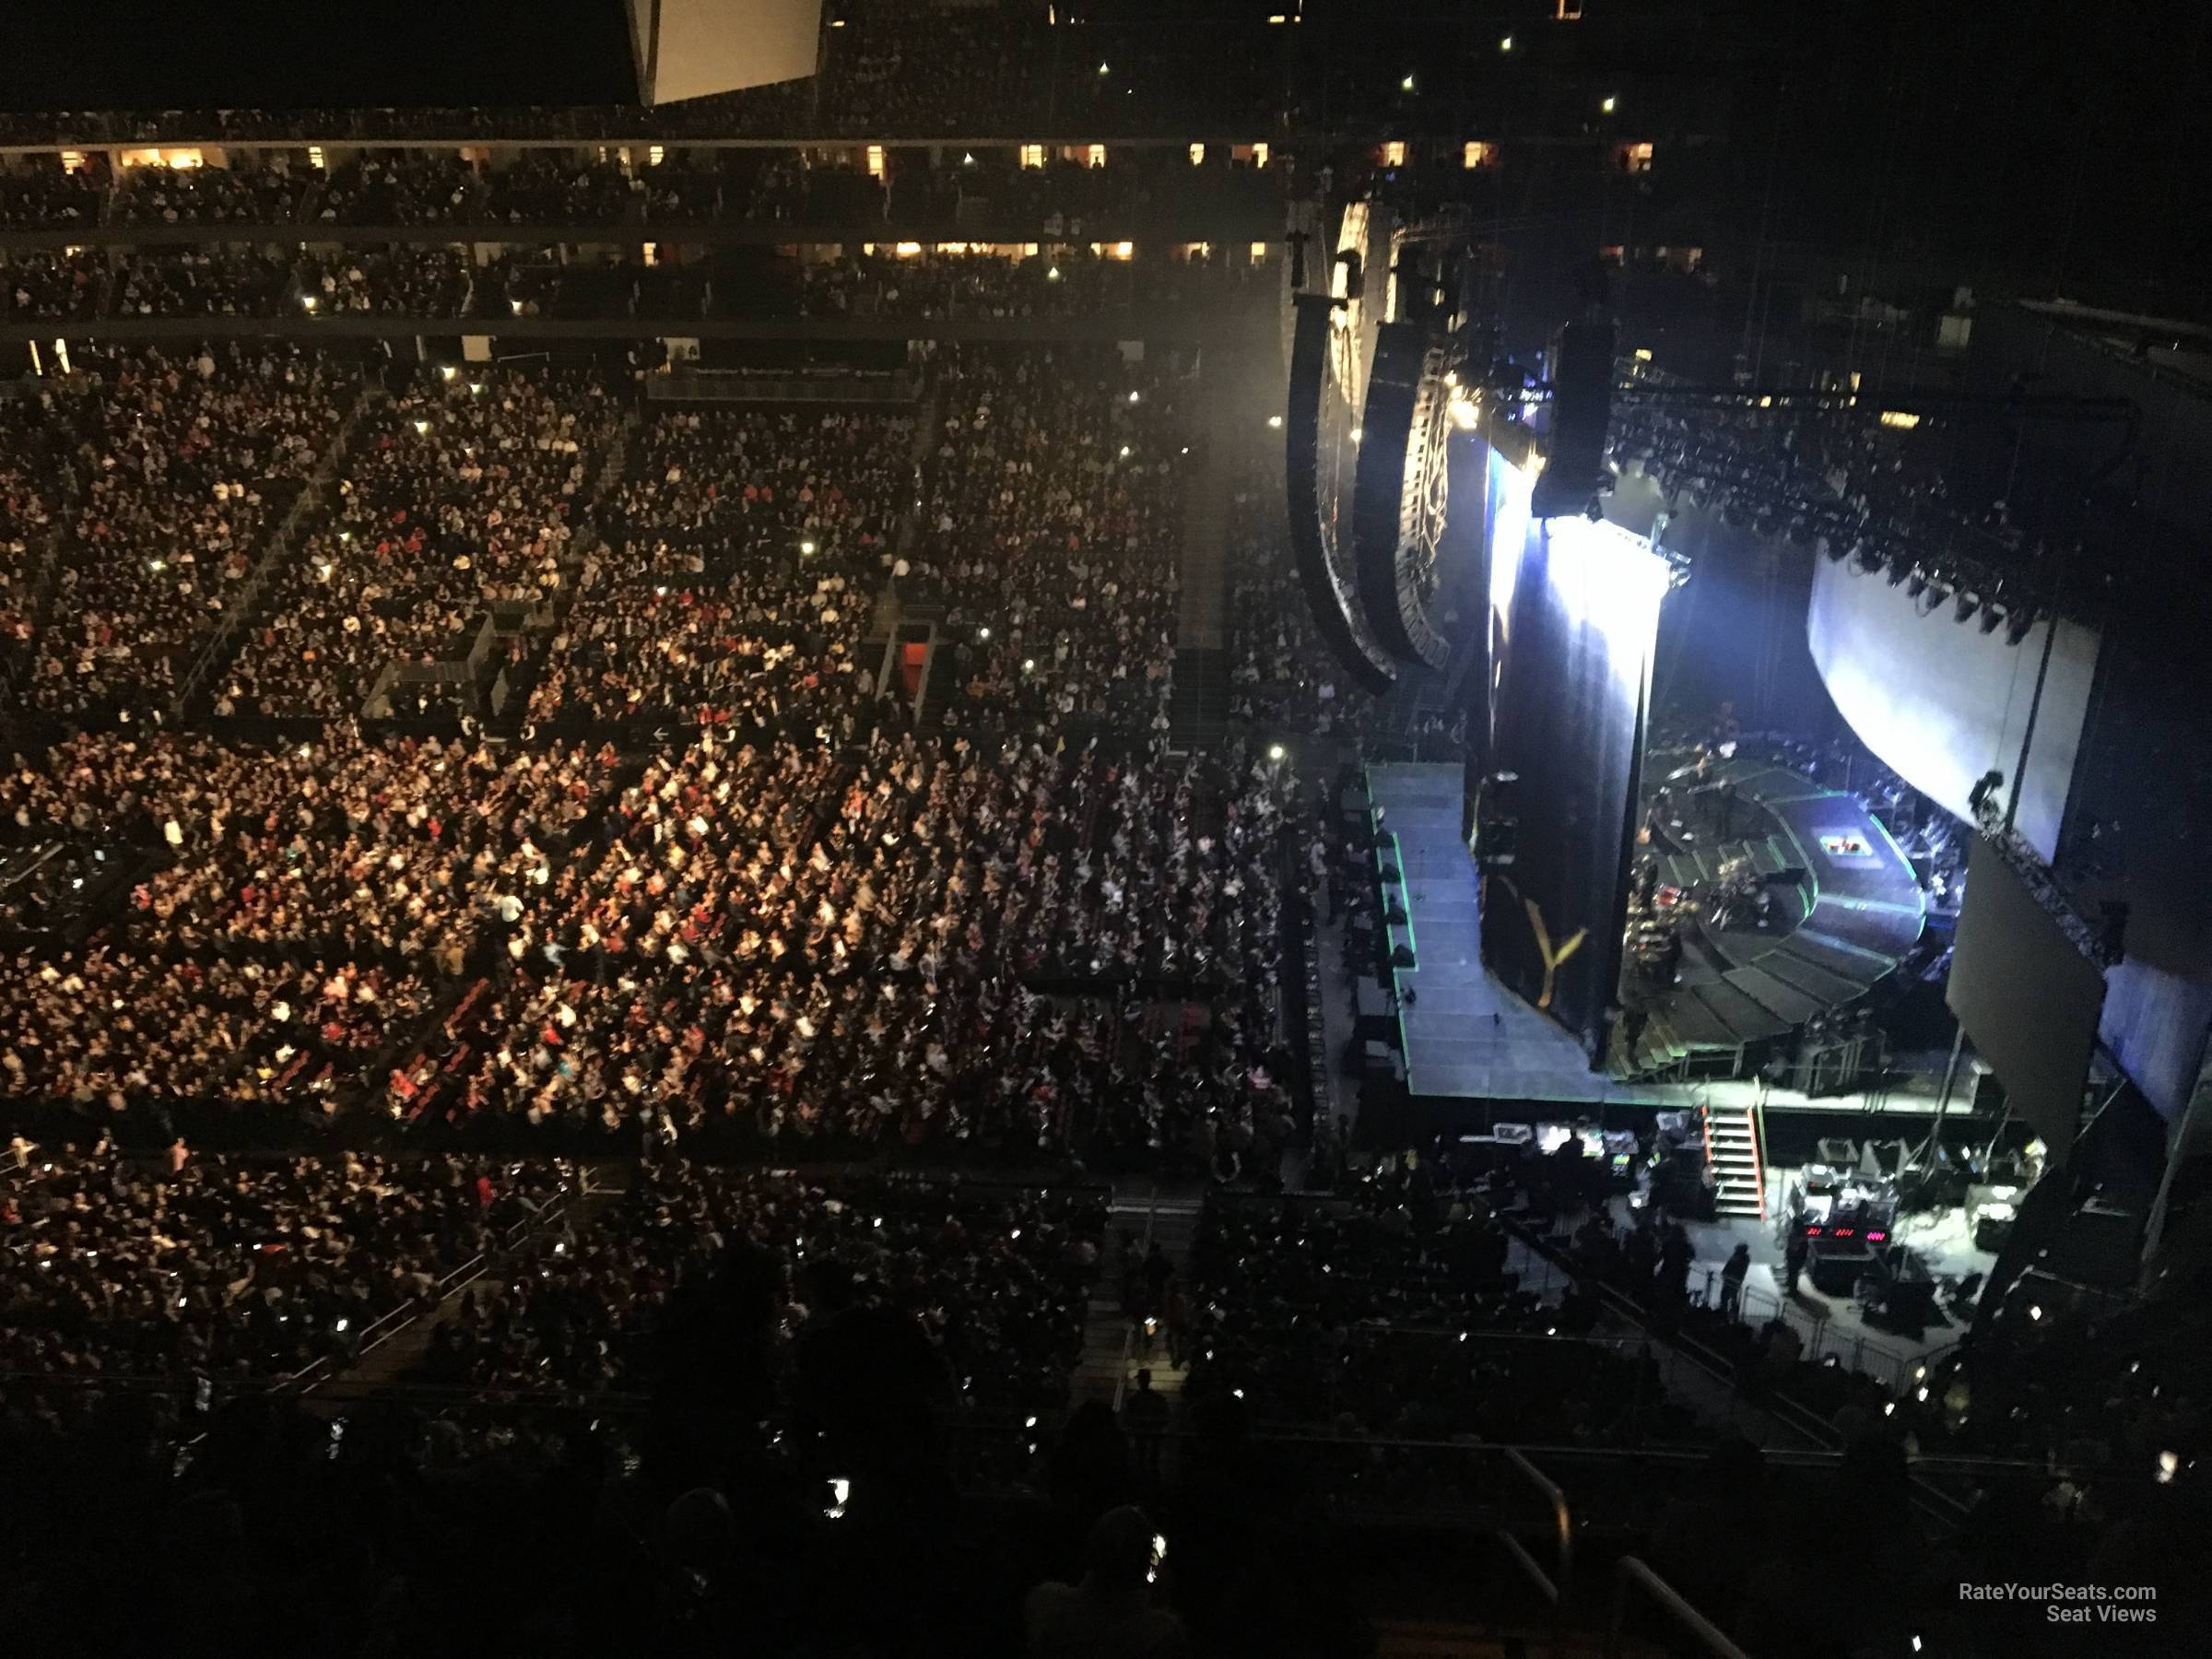 Section 113 at Prudential Center for Concerts